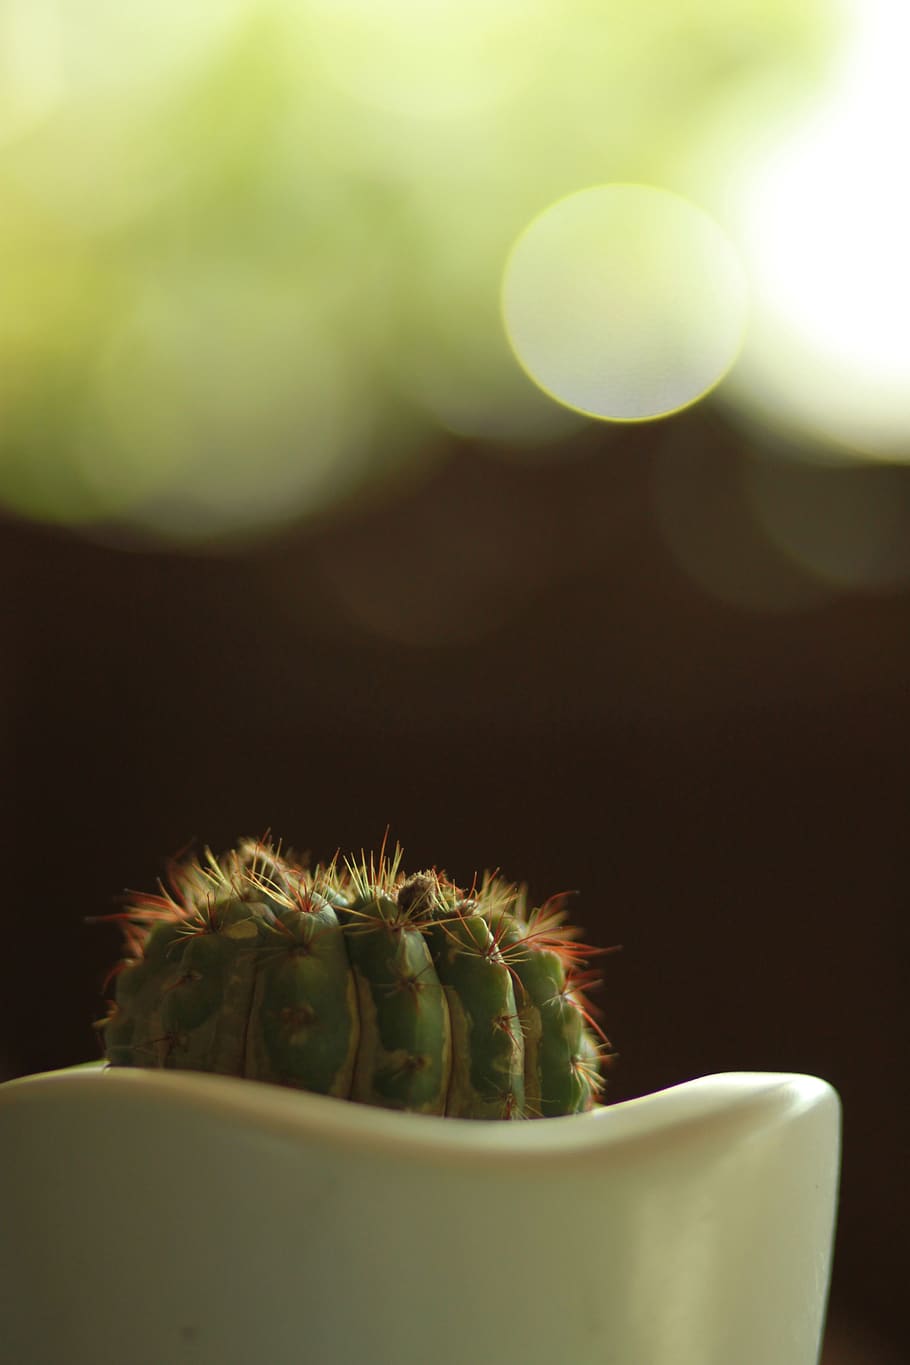 cactus, plants, thorn, potted plant, tropical plants, pointed